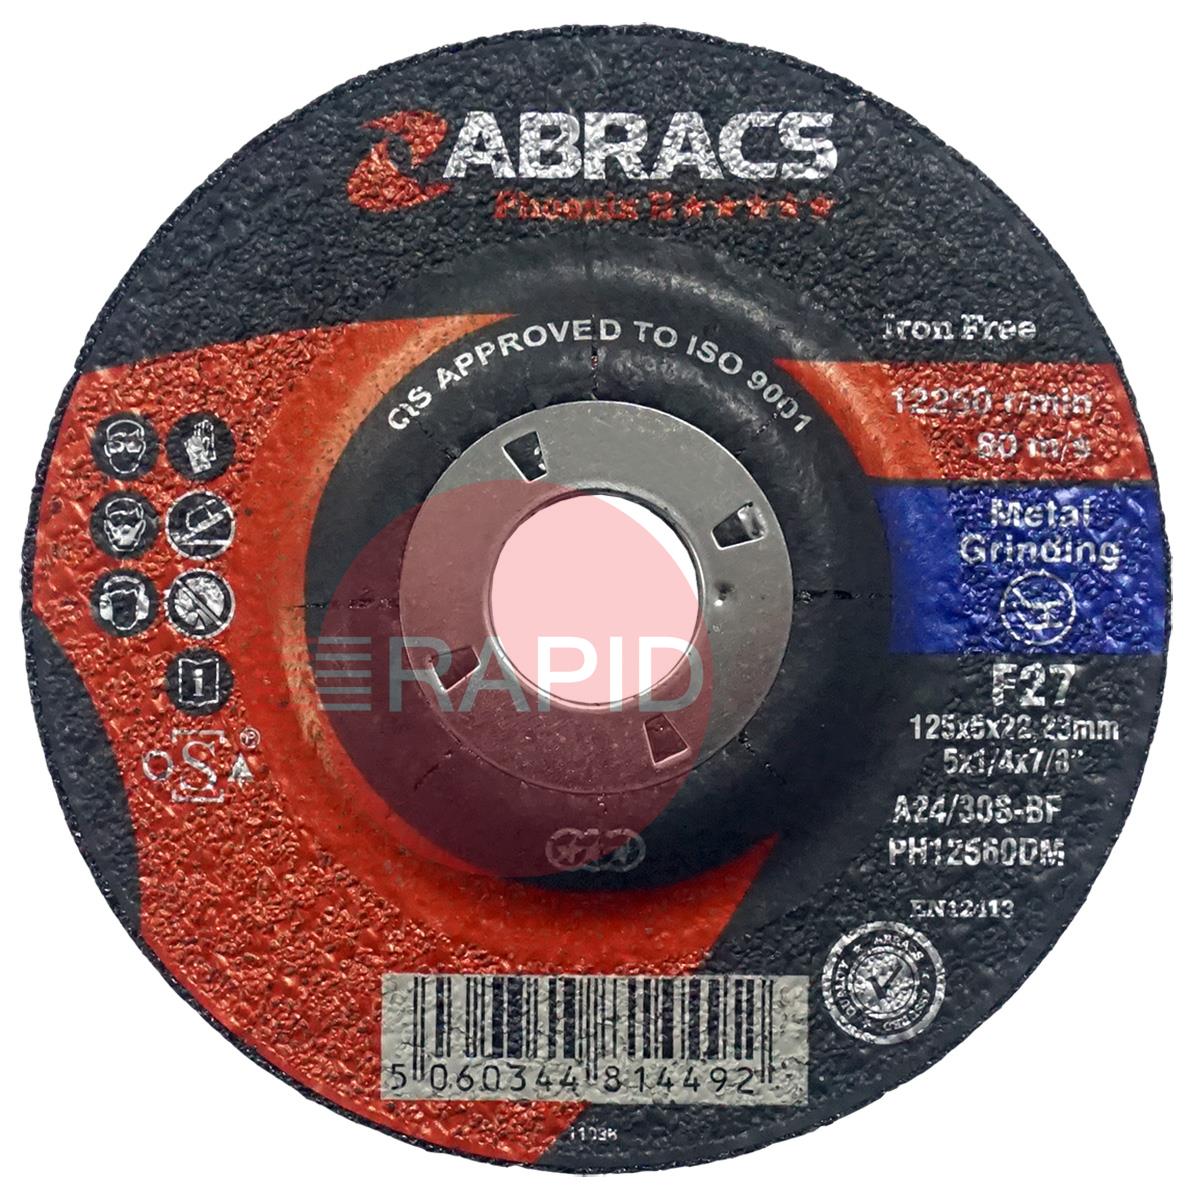 PH12560DM  Abracs Phoenix II 125mm (5) Depressed Centre Grinding Disc 6mm Thick. Grade A24/30S4BF For Steel.